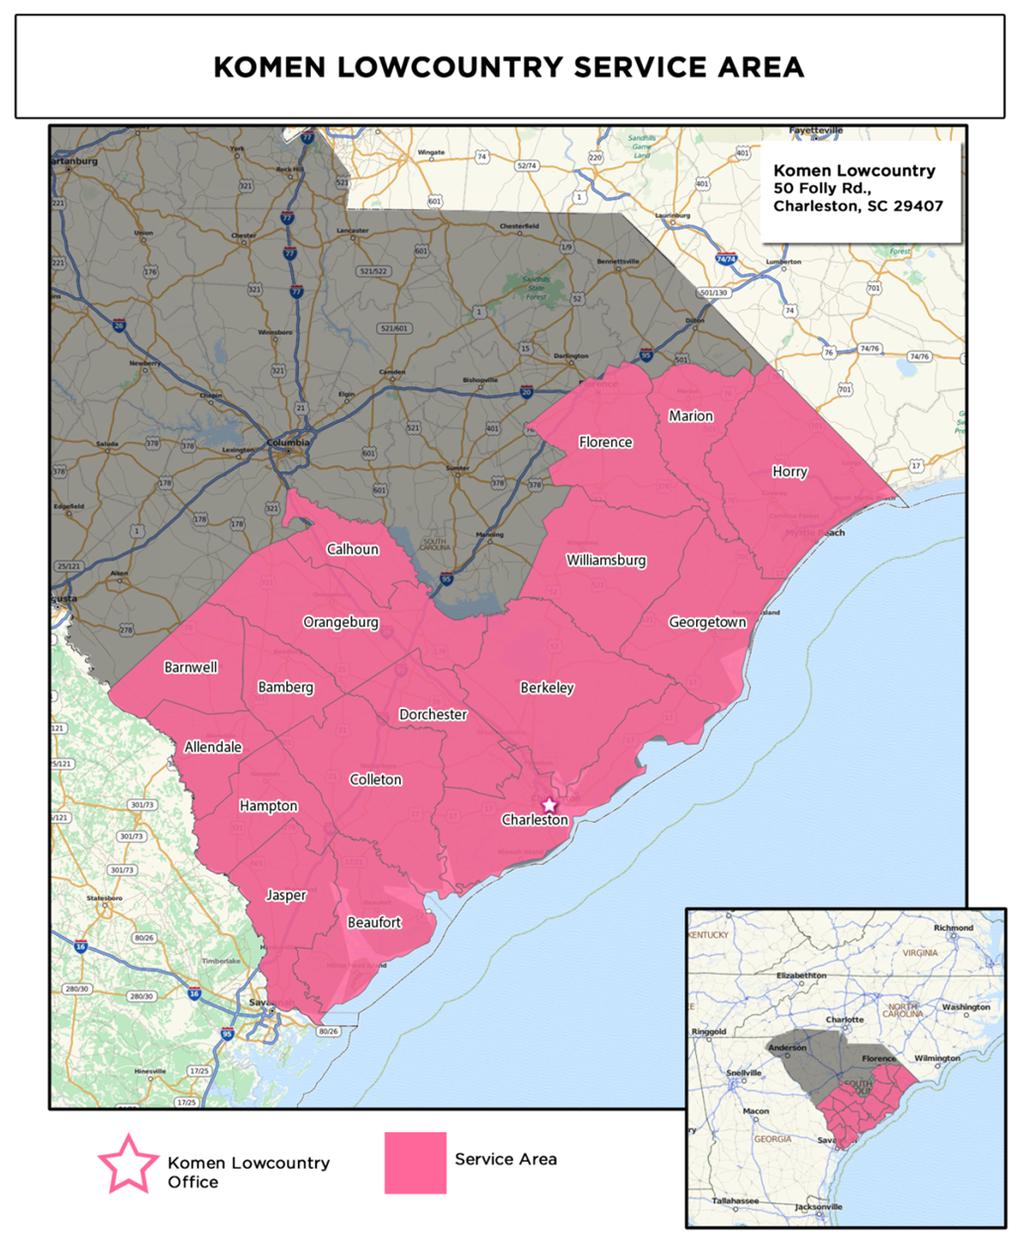 Affiliate Service Area Komen Lowcountry currently serves 17 South Carolina counties, from the coast to the PeeDee and Piedmont regions (Figure 1.